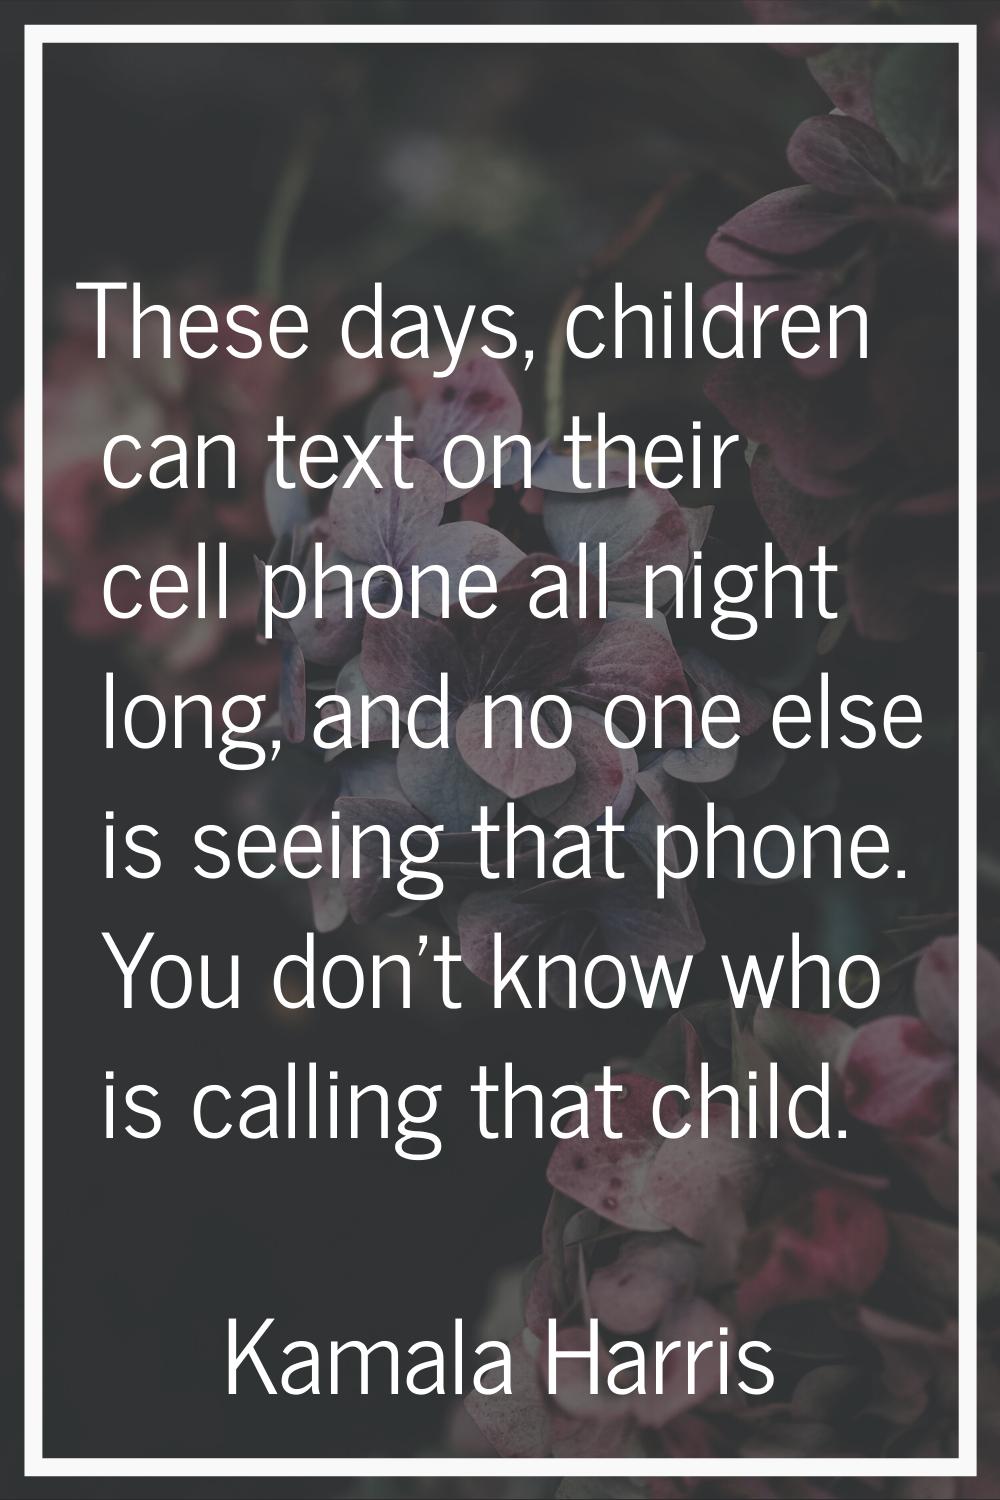 These days, children can text on their cell phone all night long, and no one else is seeing that ph